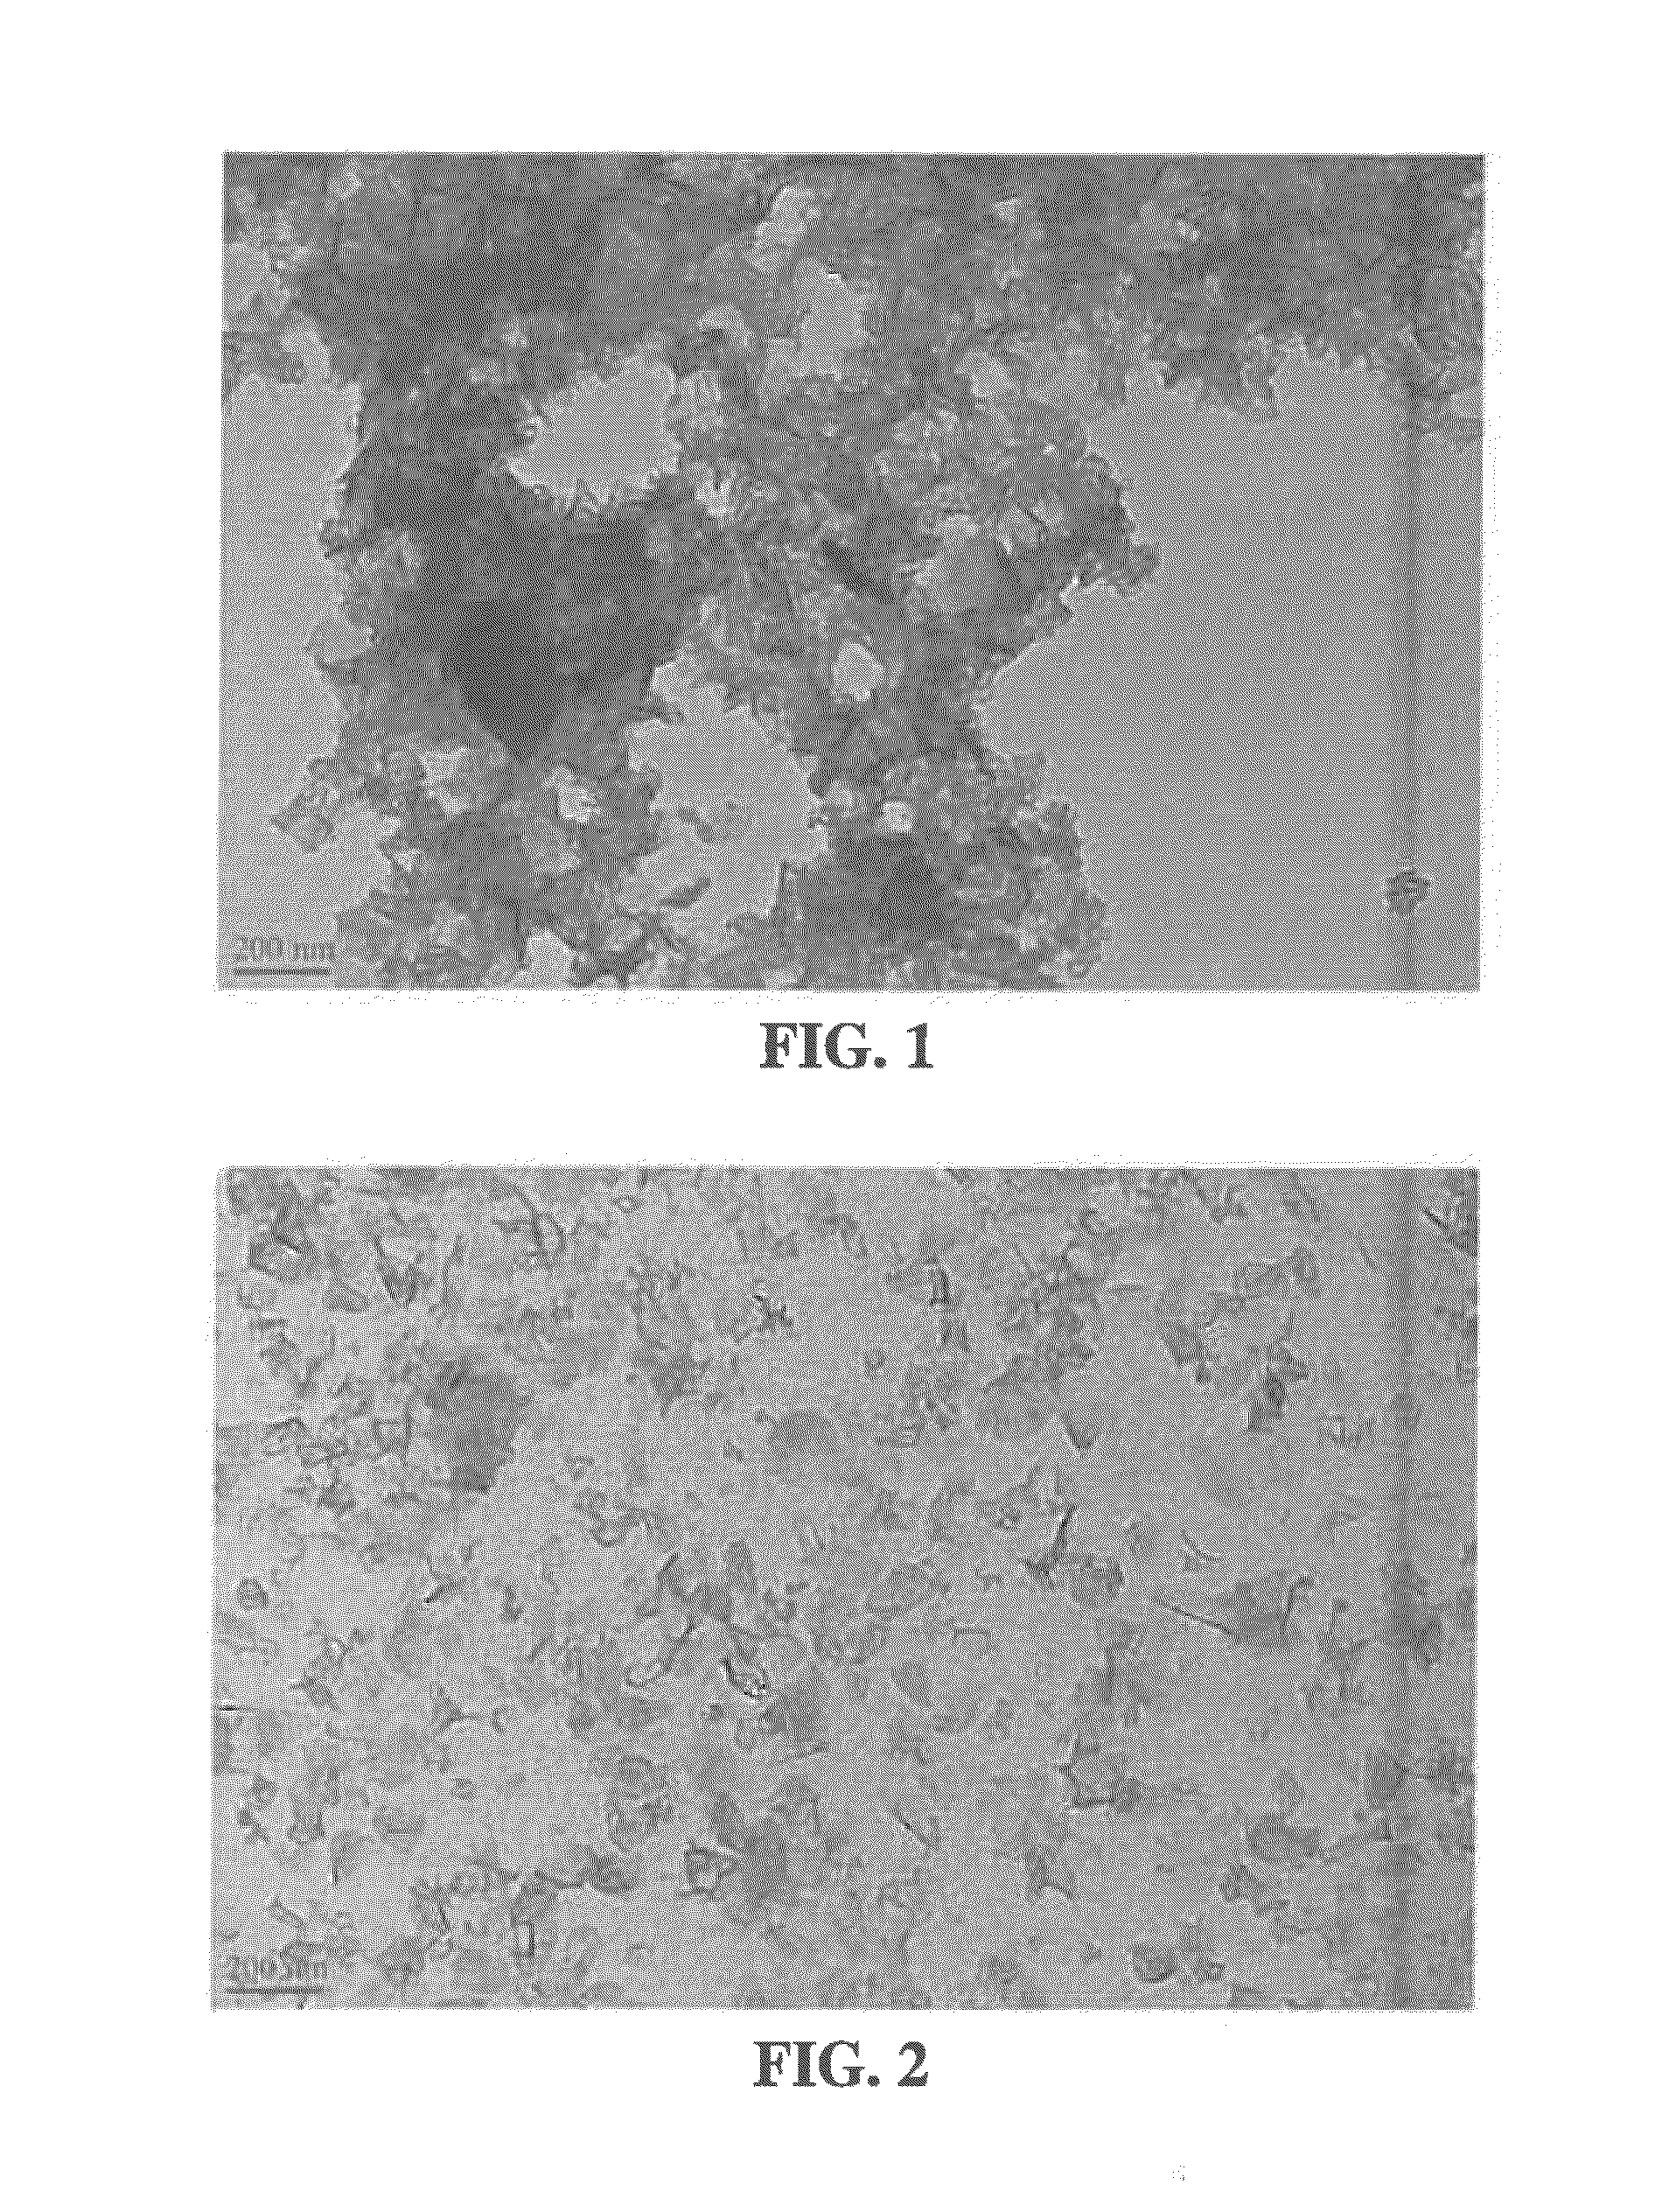 Graphenic carbon particle dispersions and methods of making same